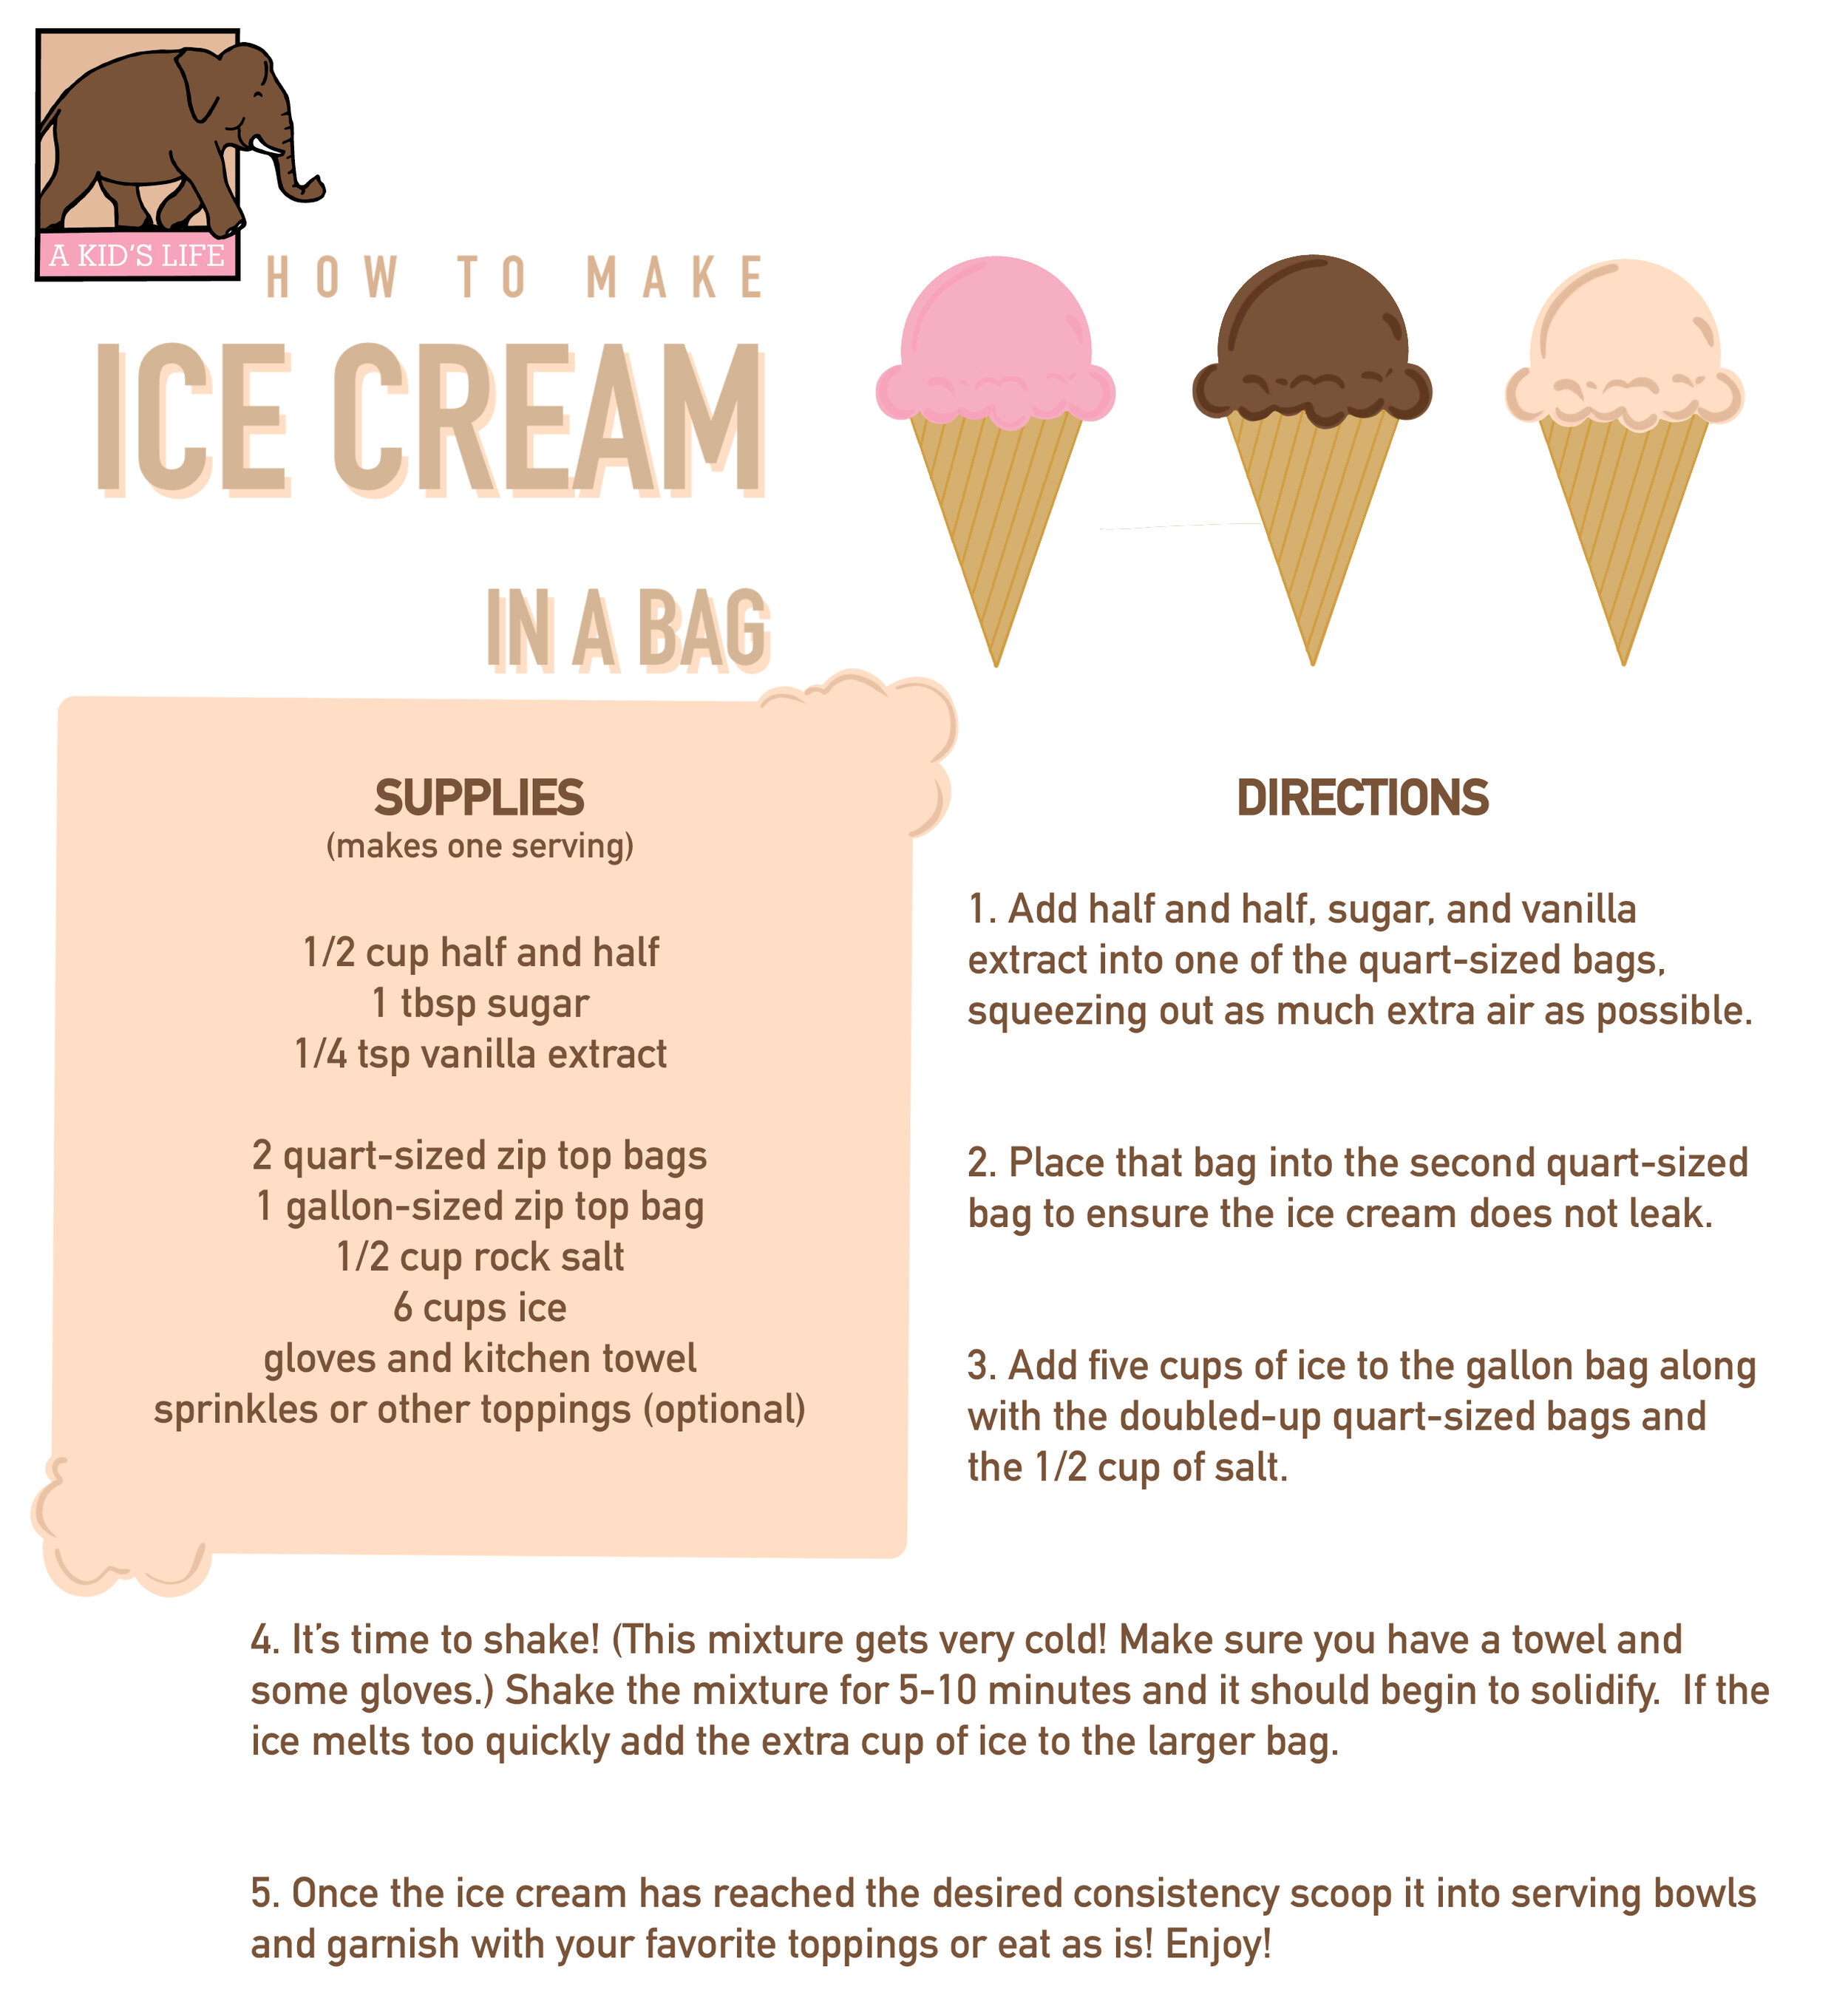 You're Going to Make Ice Cream This Summer!